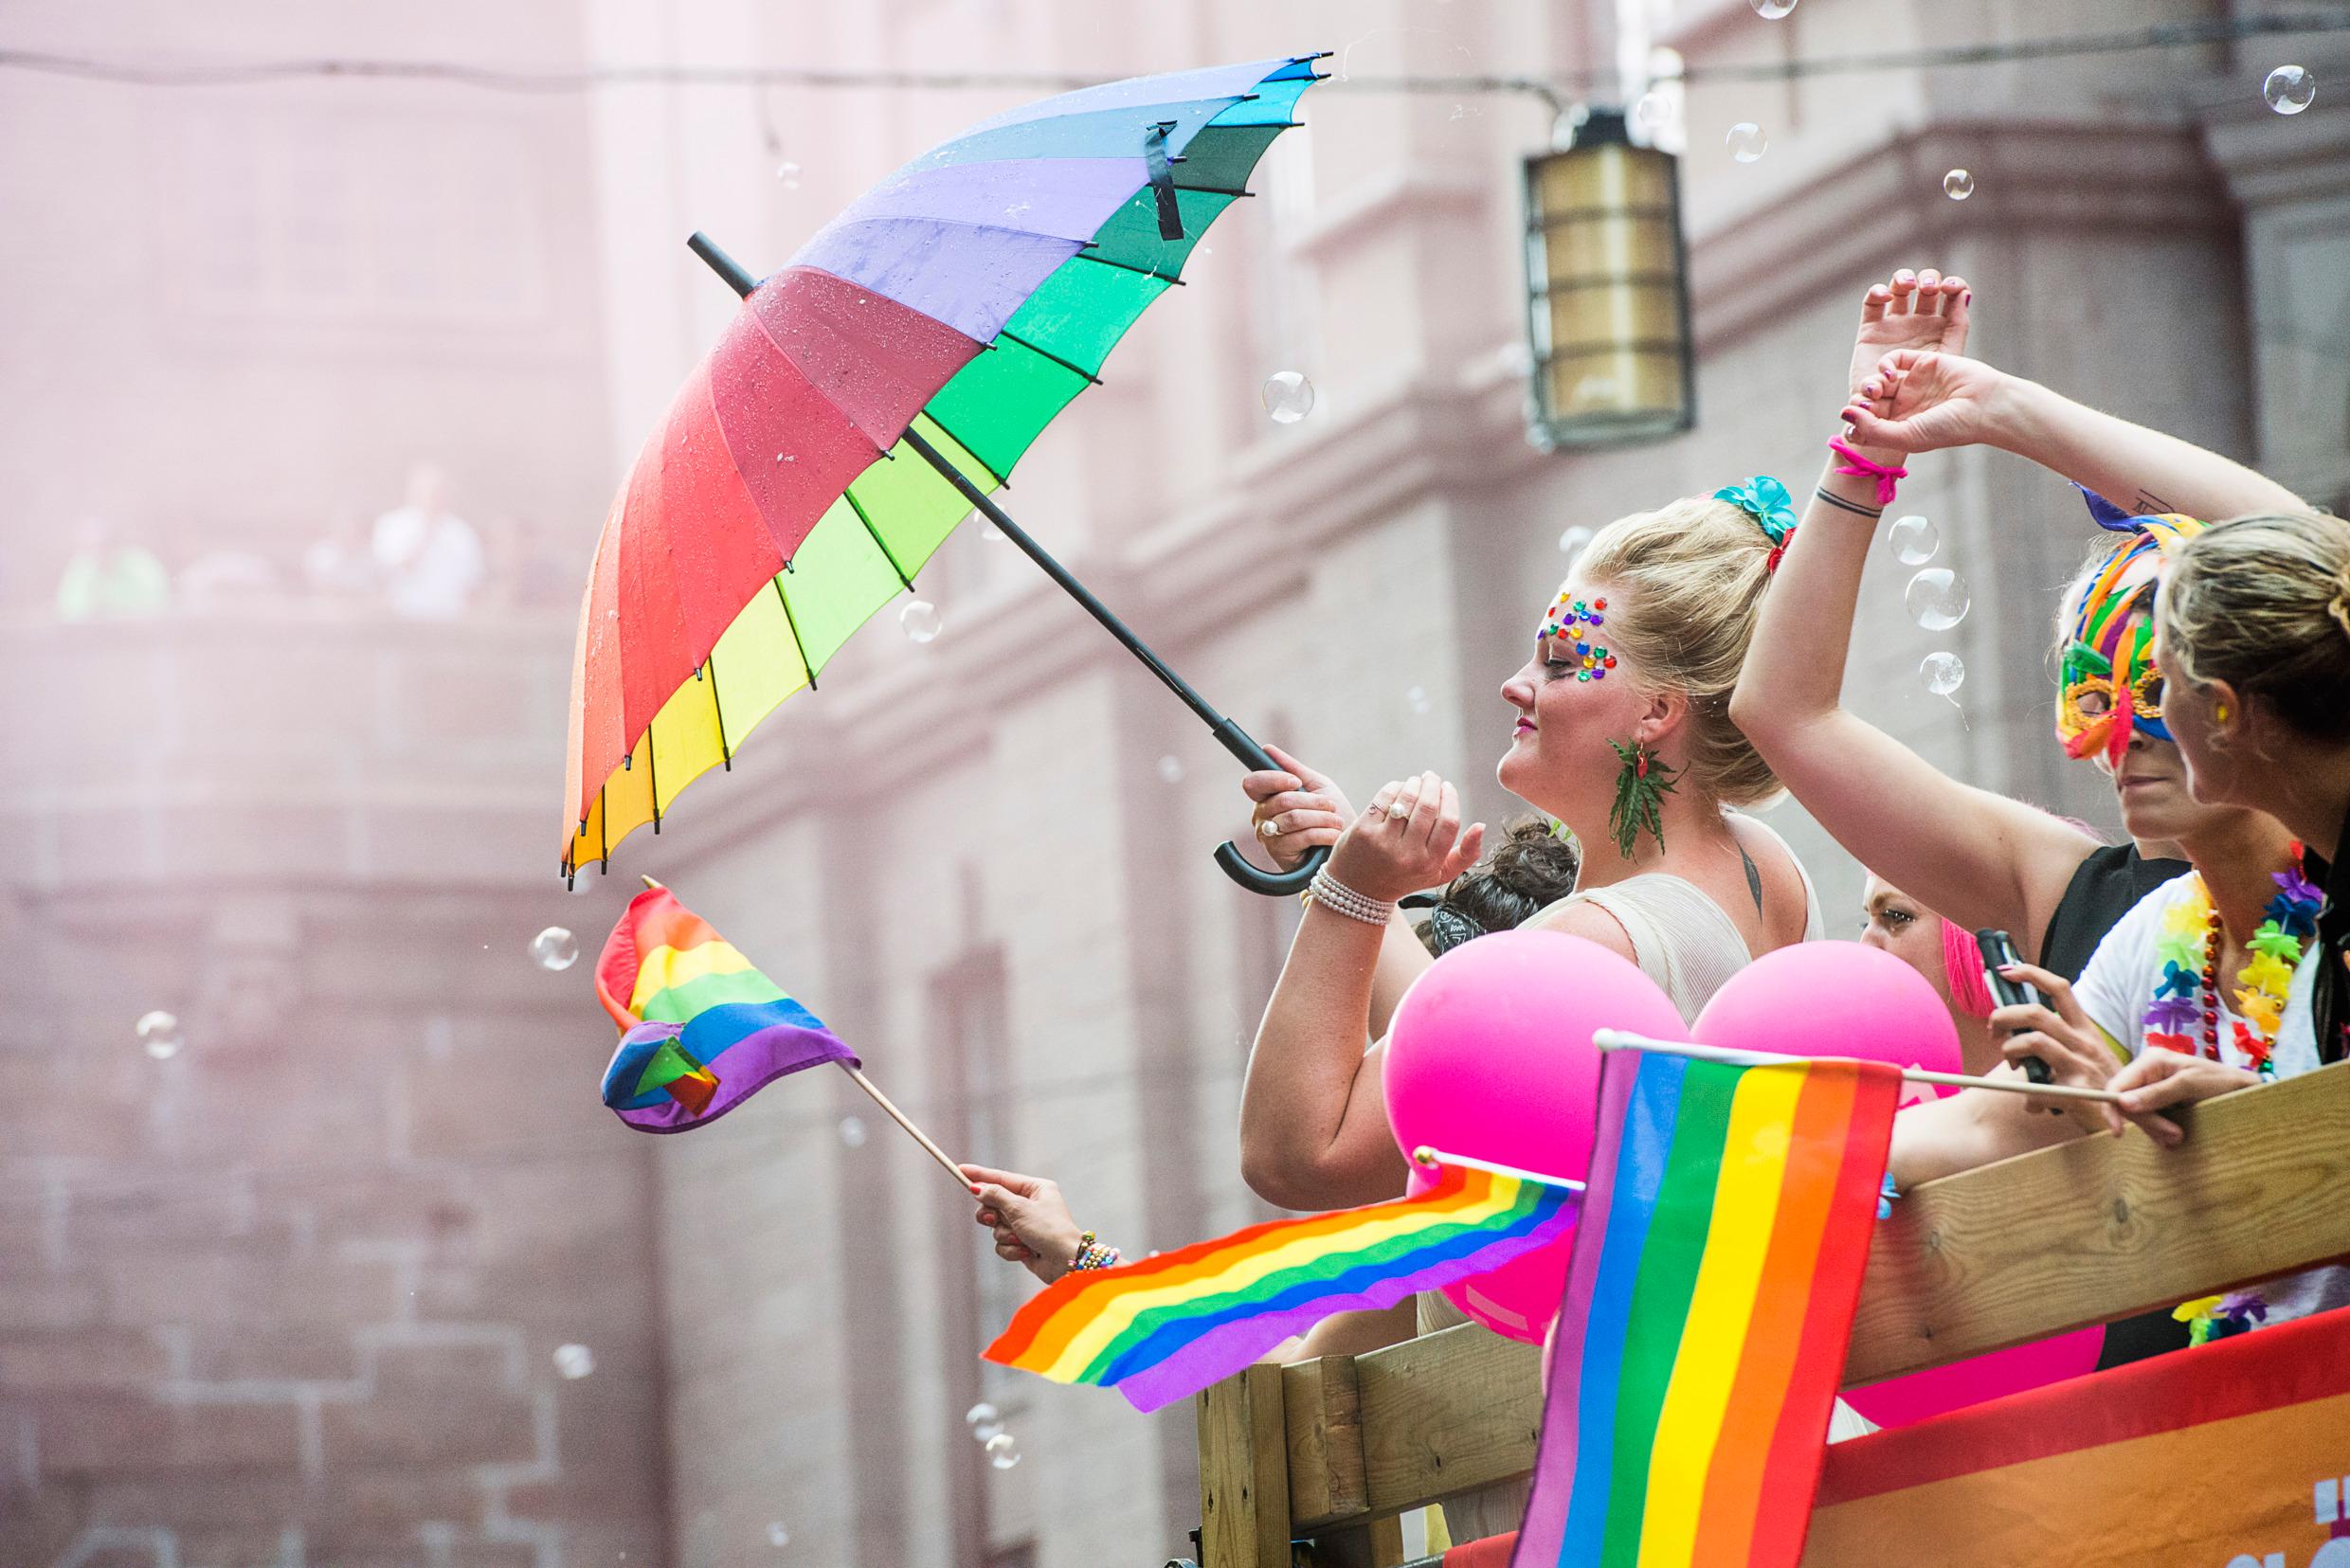 People taking part in a pride festival, with rainbow-coloured flags and accessories.